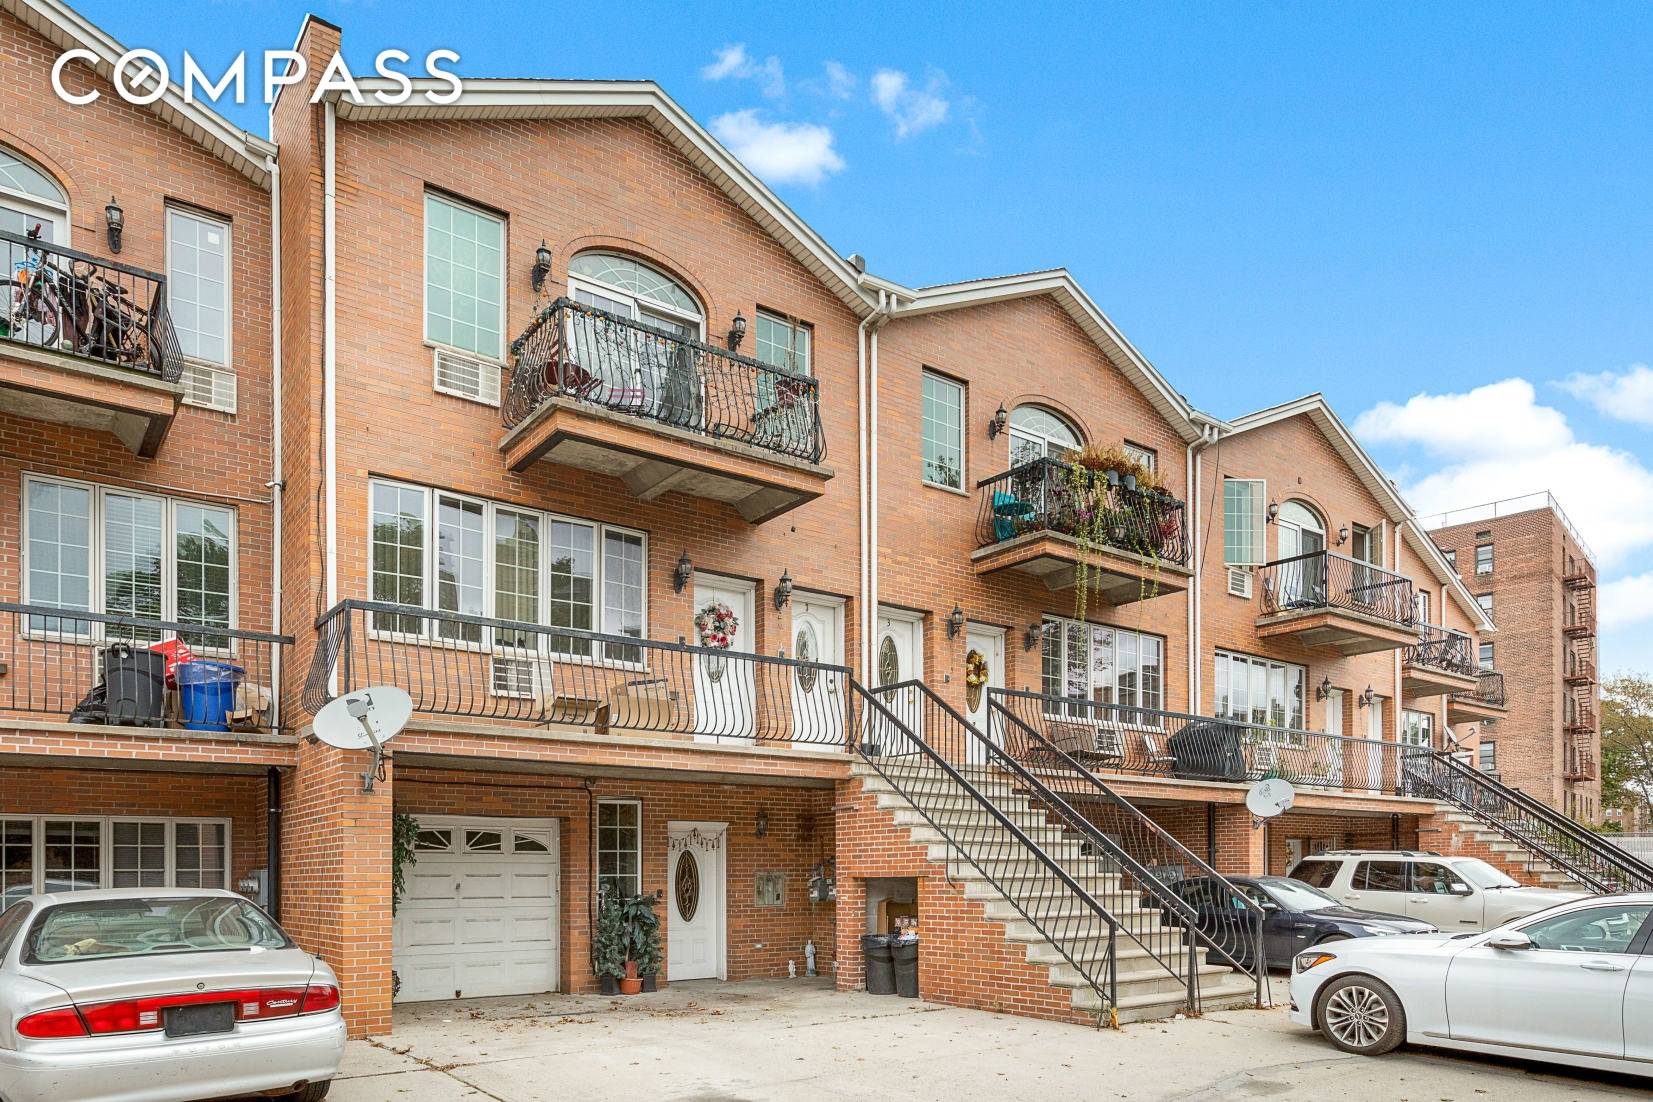 You now have this rare investment opportunity to own two spacious multifamily properties in a great location in Gravesend Brooklyn.